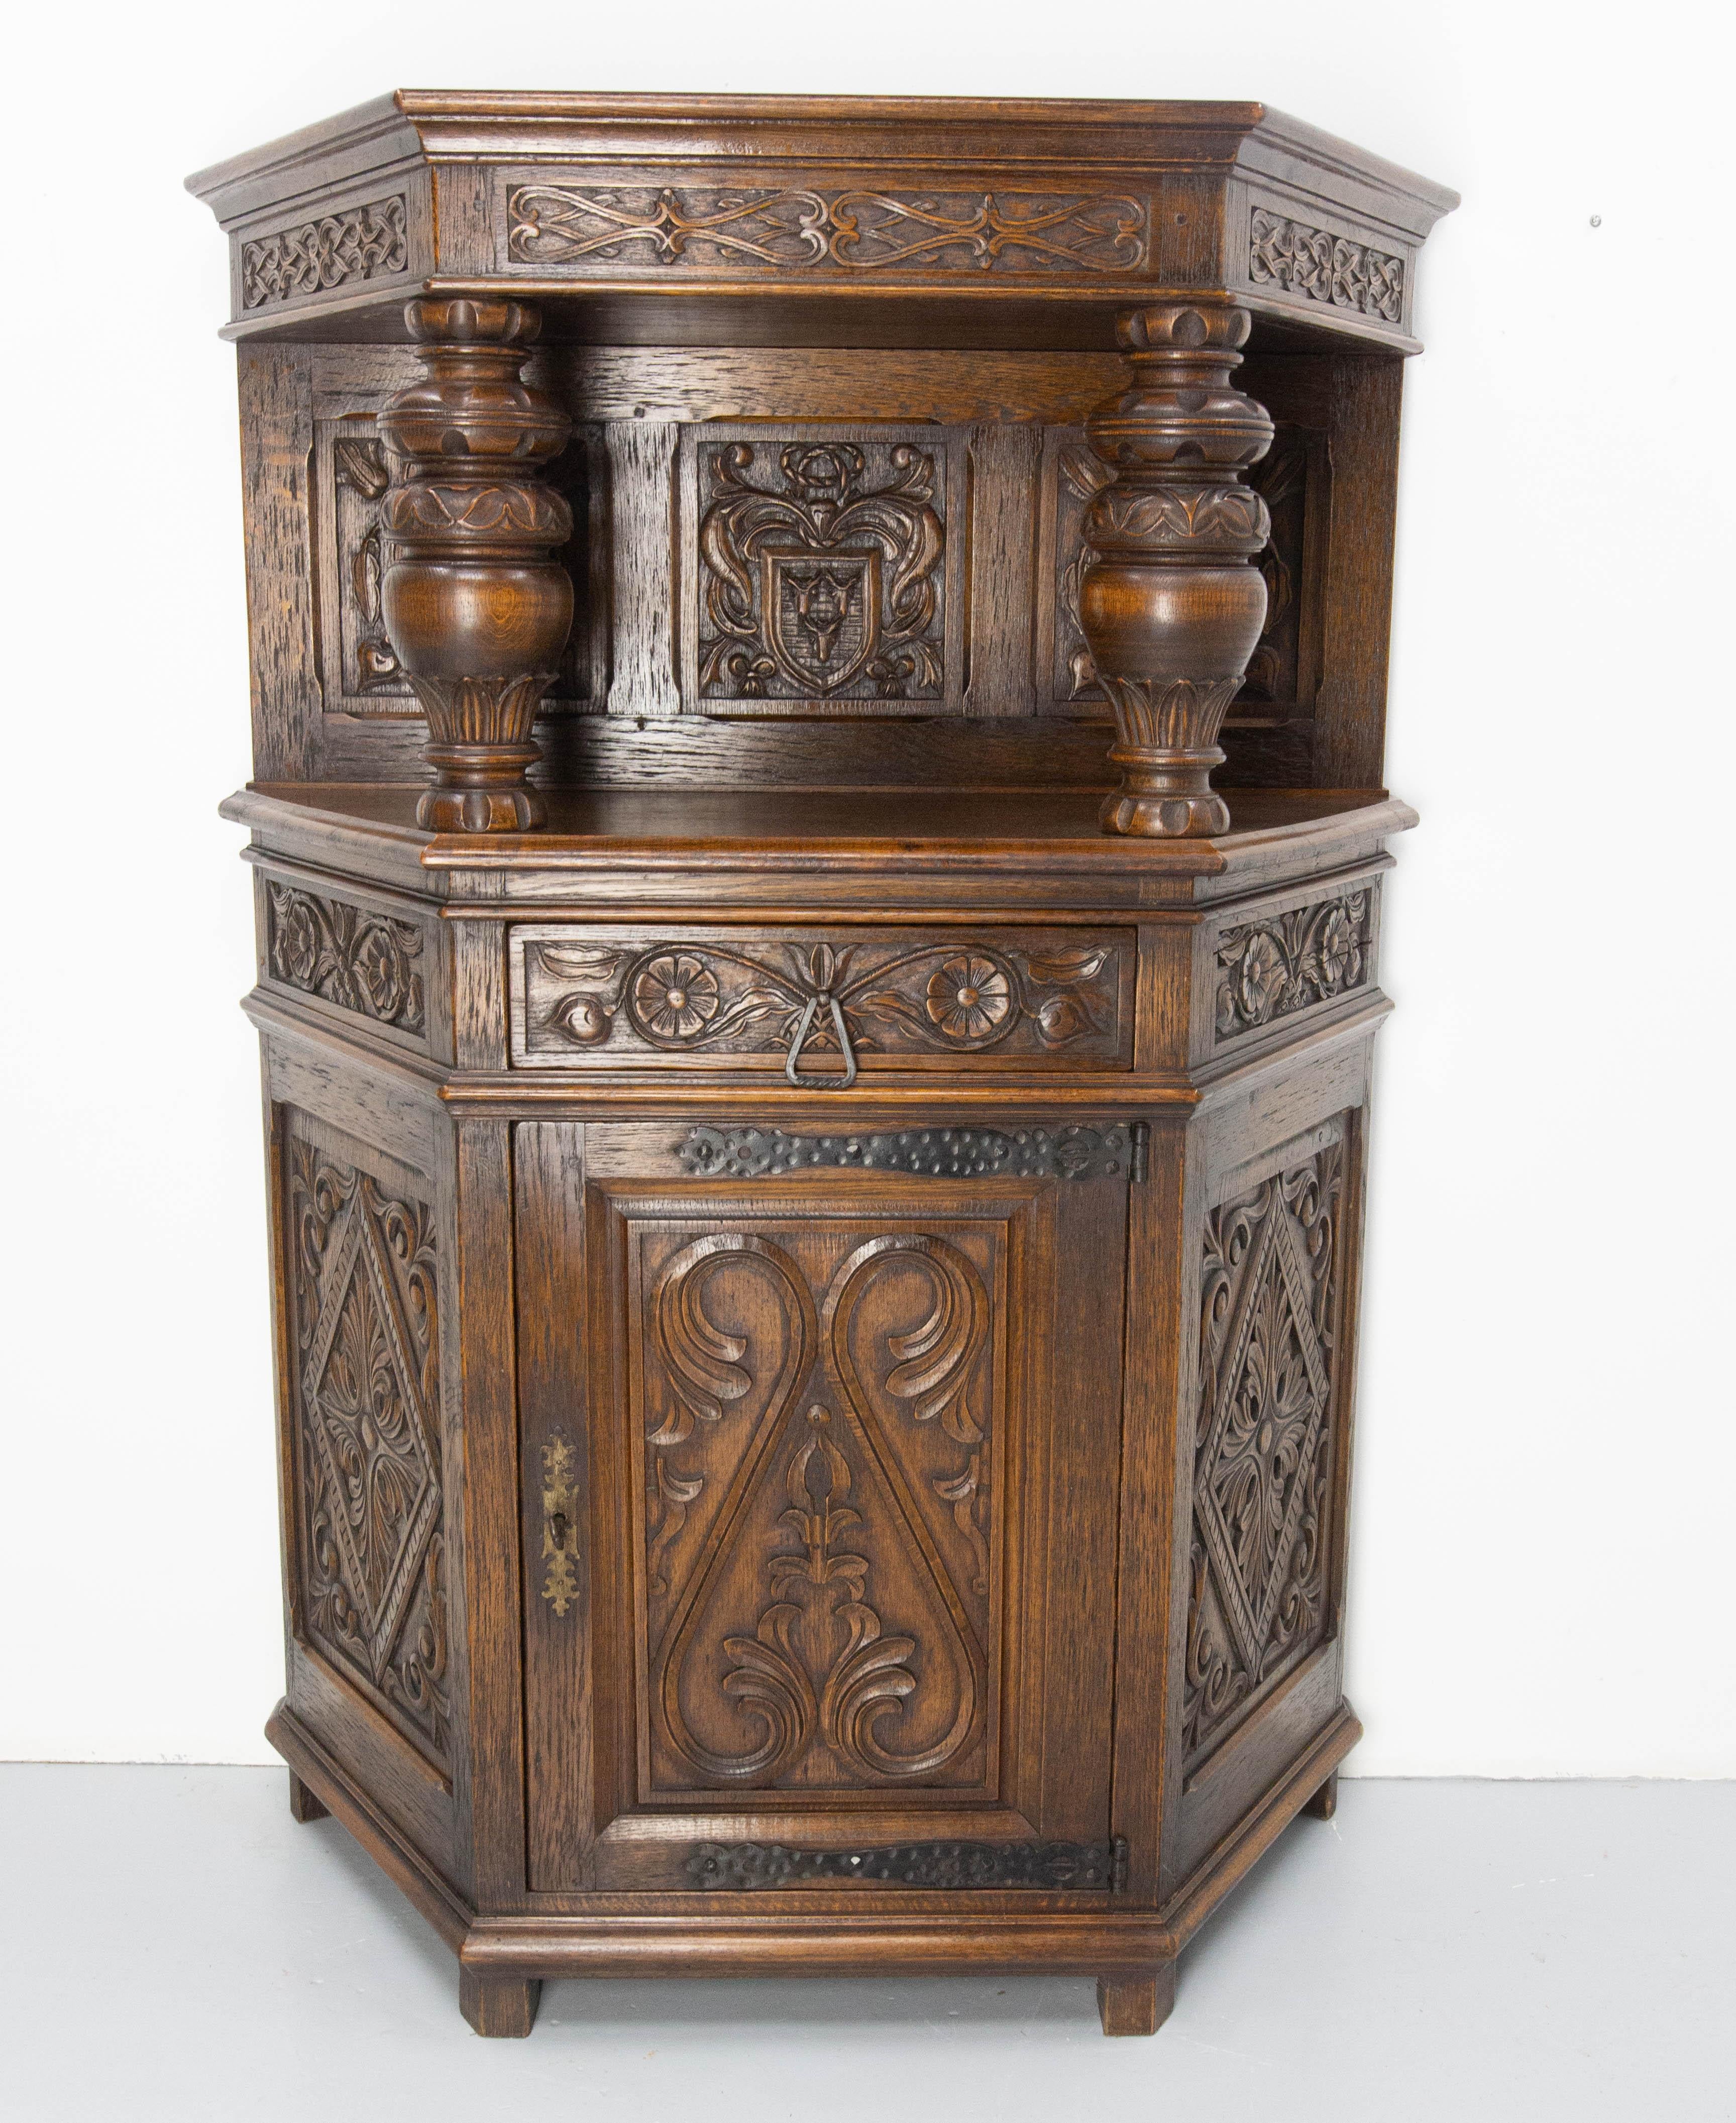 Oak and iron dessert or little buffet in the Spanish Renaissance style
This furniture was made in the 1960's and totally hand-carved. On the upper part the central panel represents a coat of arms with three deer heads. The rest of the furniture is